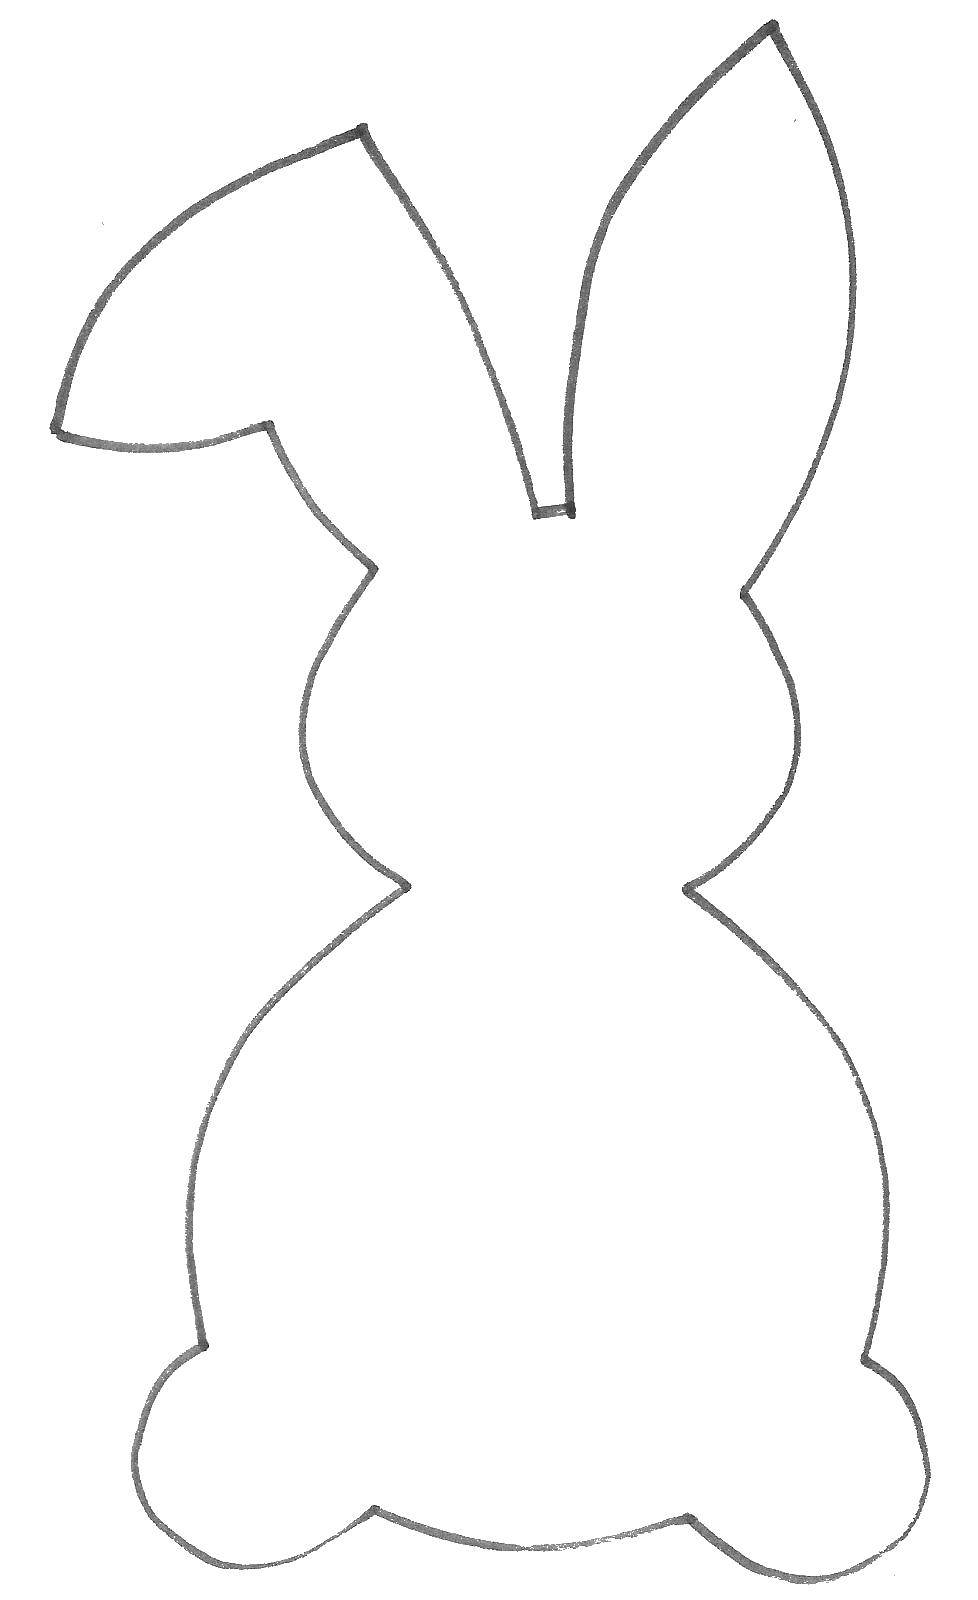 Coloring Contour piglette. Category The contour of the hare to cut. Tags:  the contours, honey.